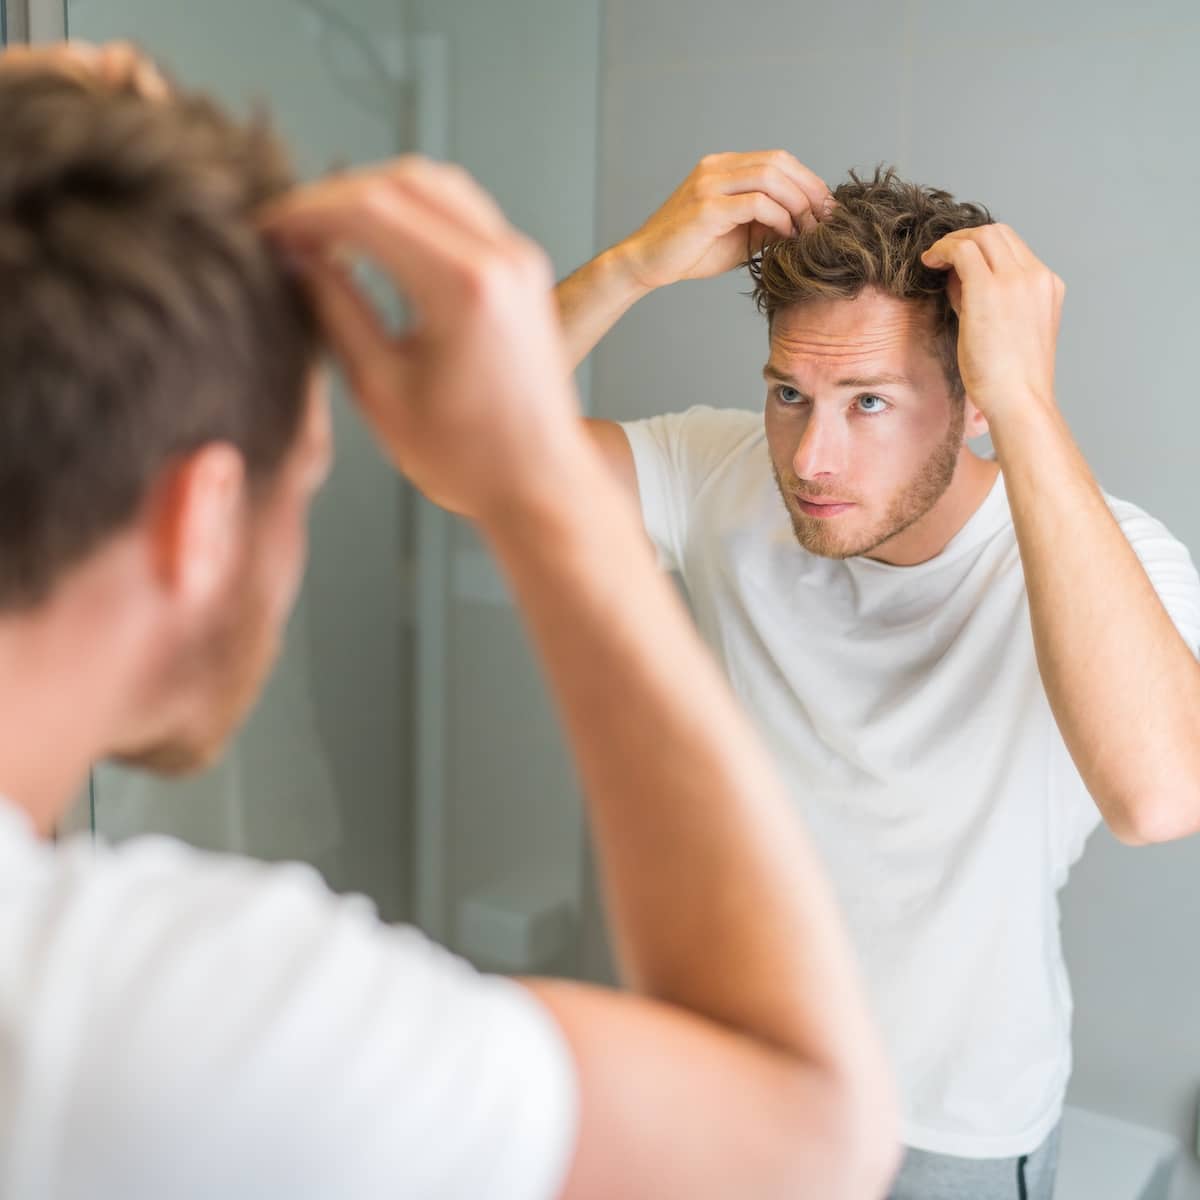 Sudden Hair Loss: Why it happens and what you can do